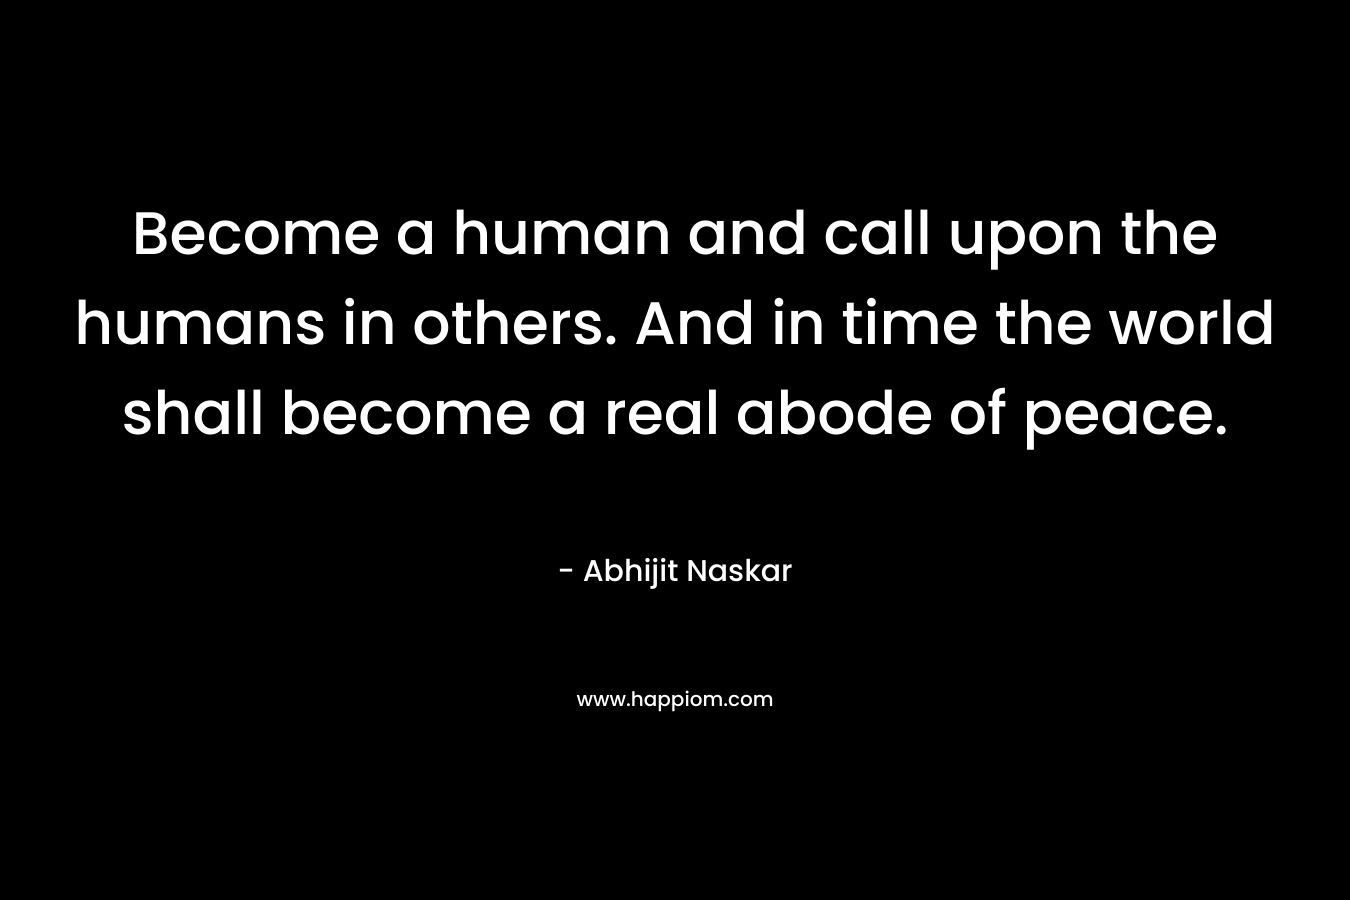 Become a human and call upon the humans in others. And in time the world shall become a real abode of peace.